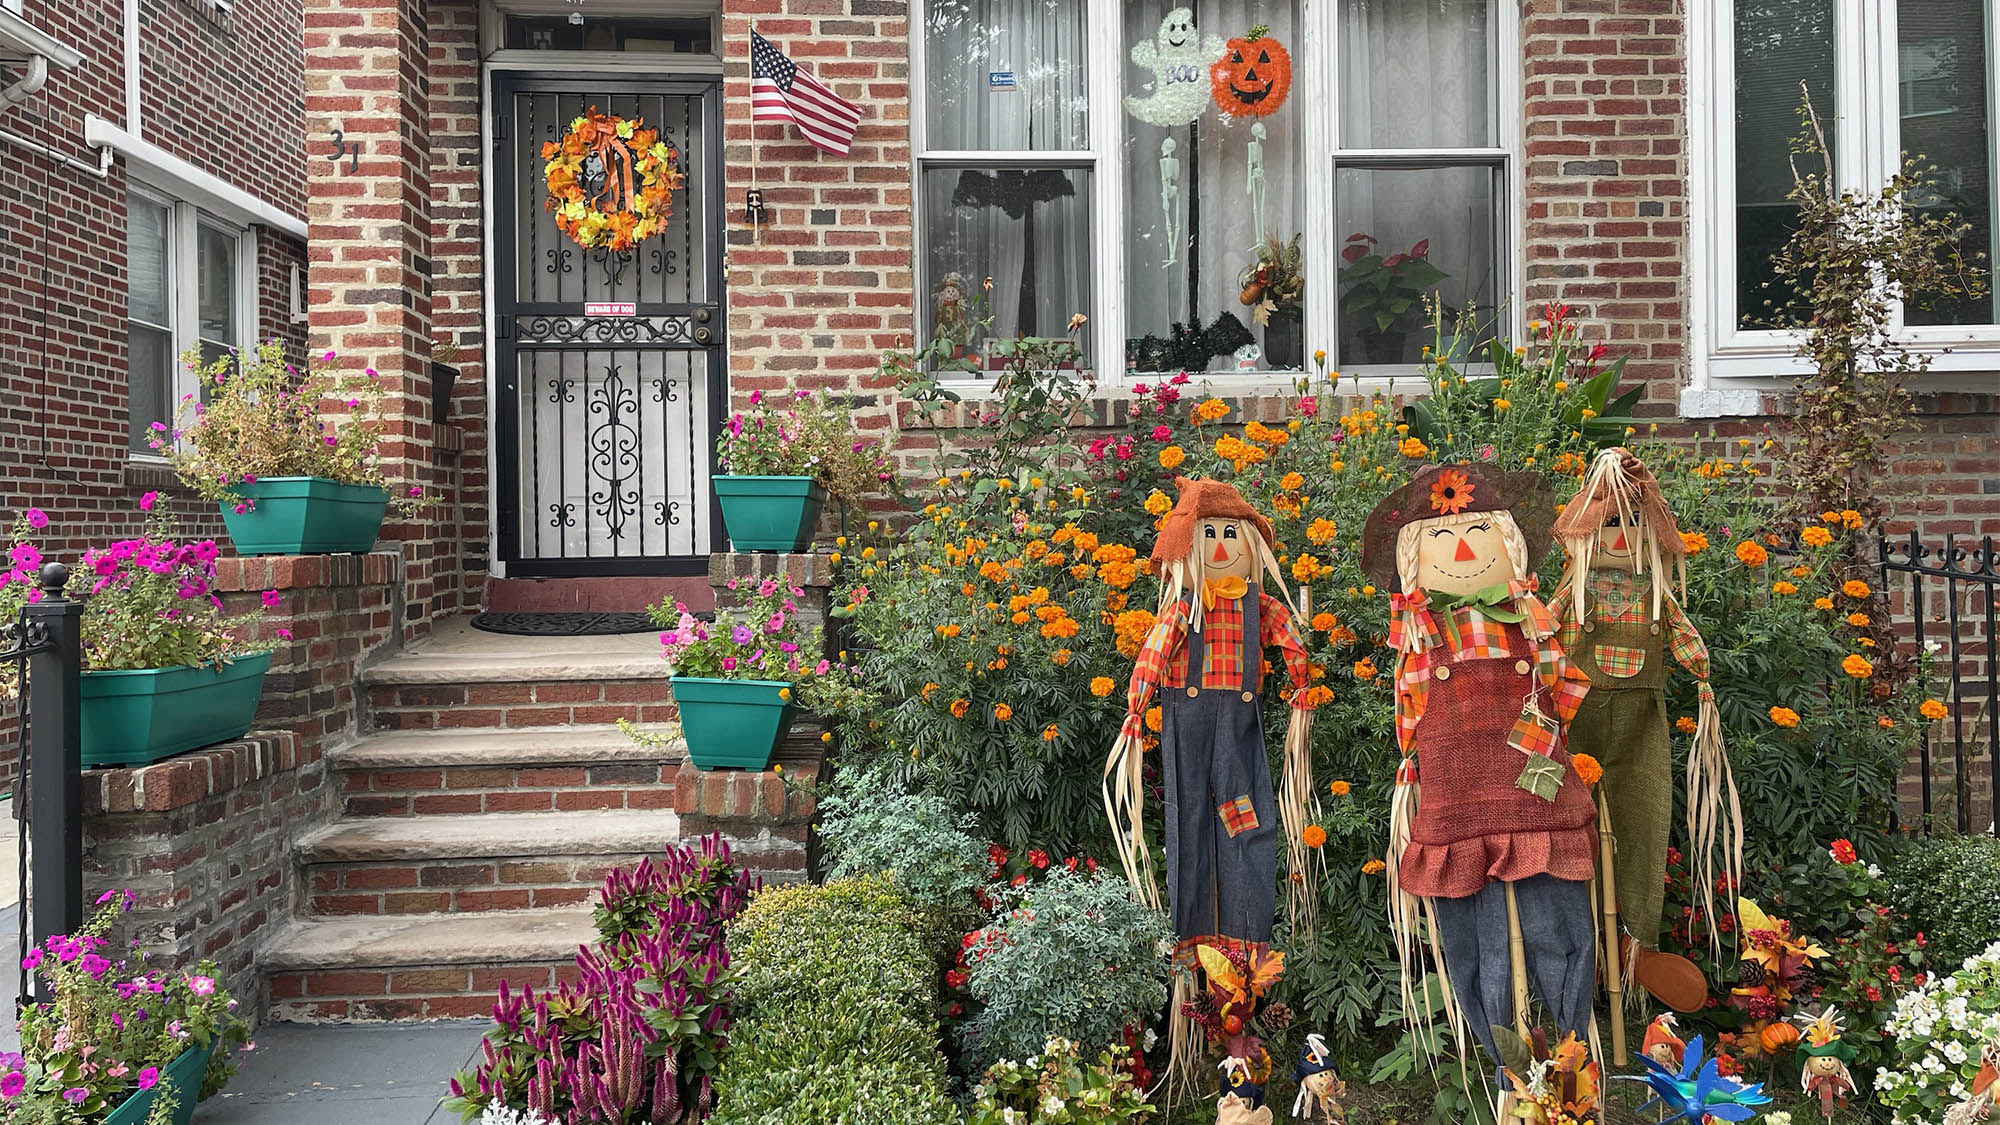 Scarecrows in front yard with brick house in background